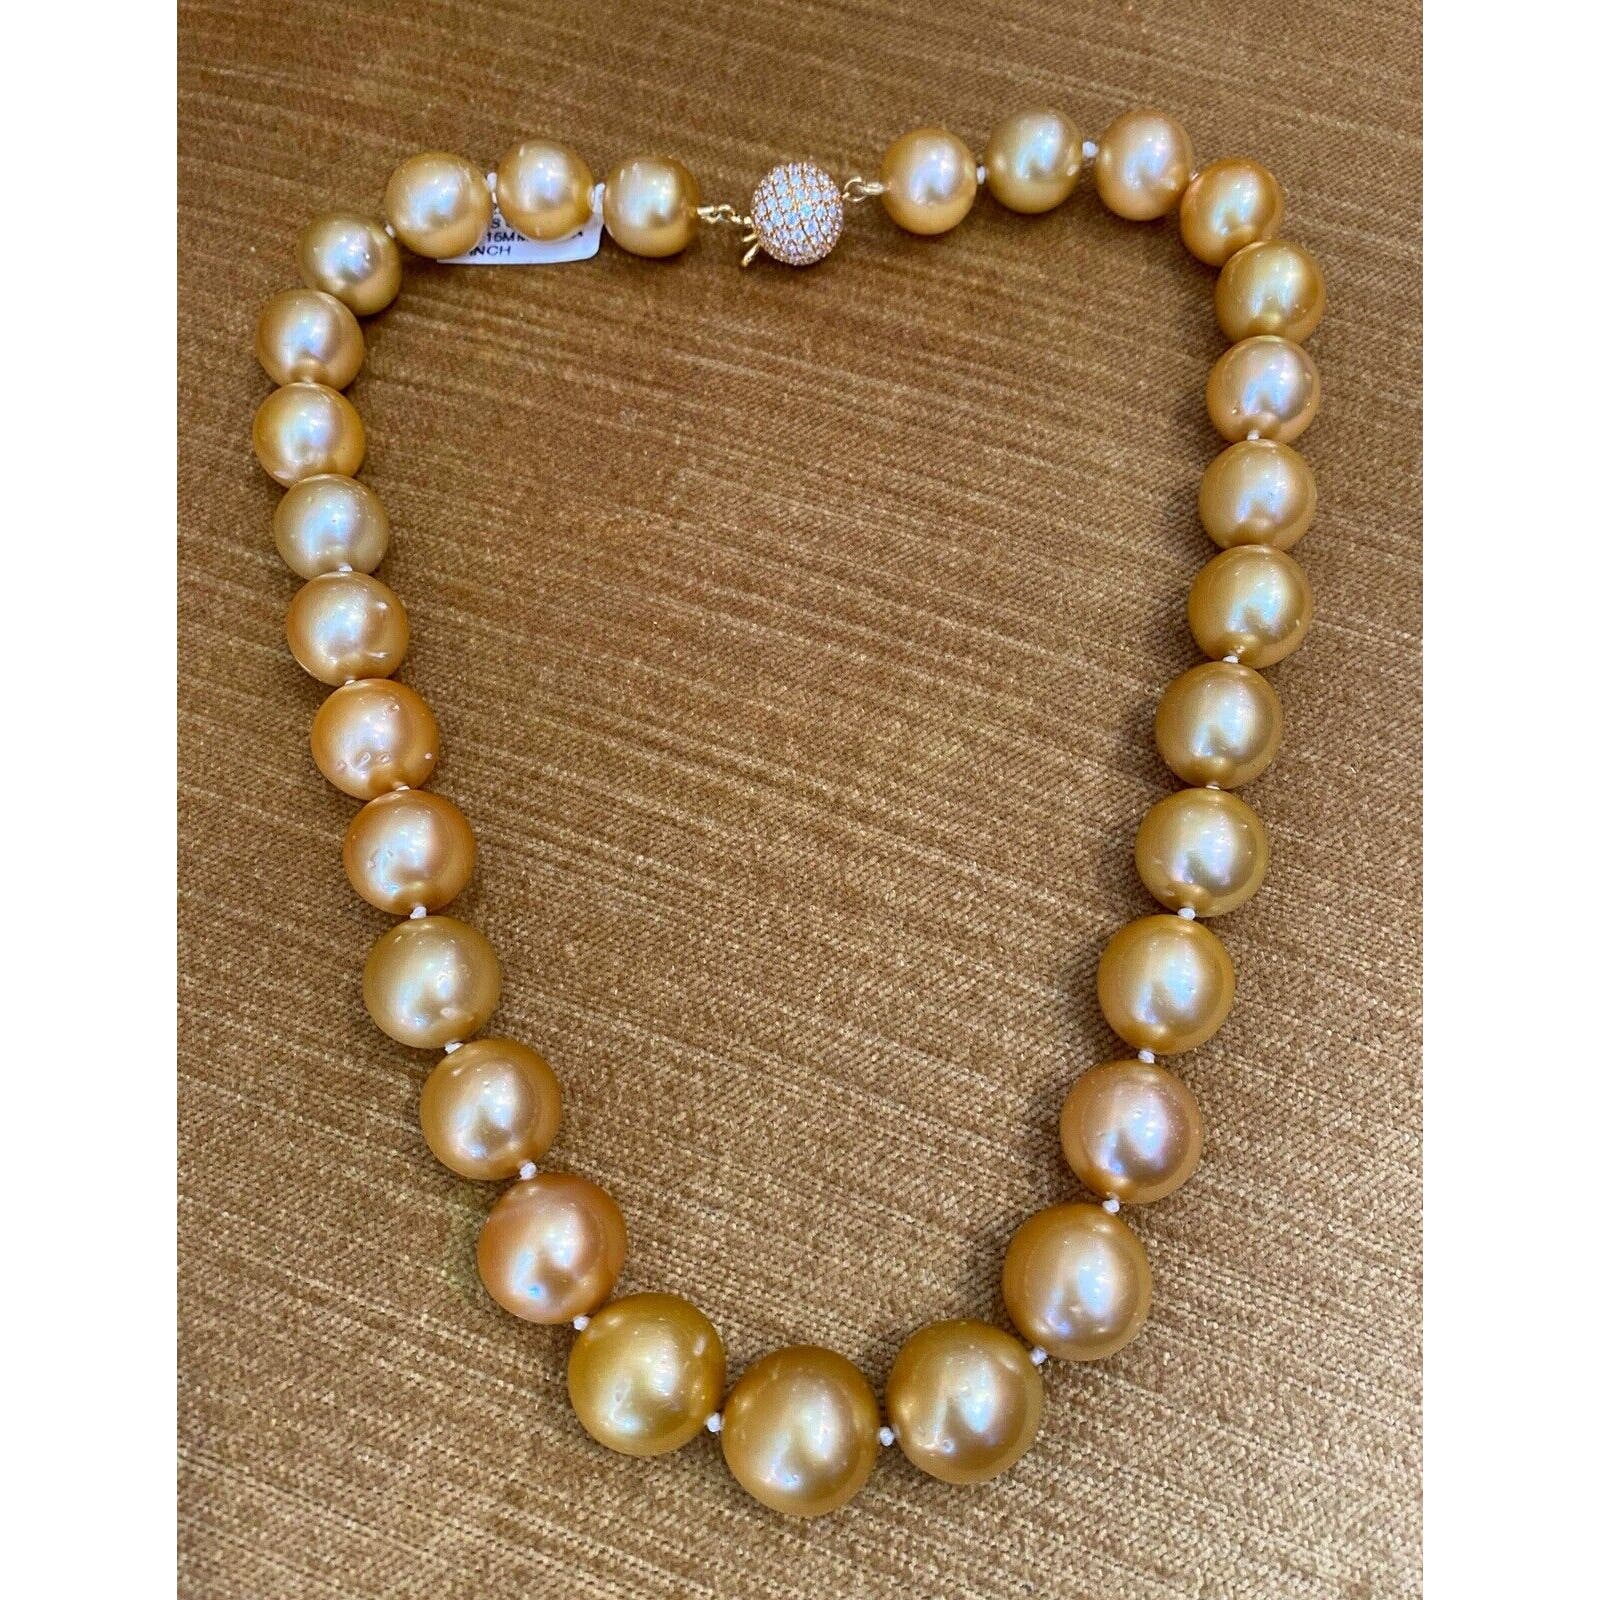 Golden South Sea Pearls w/ Pave Diamond Clasp Necklace 18k Yellow Gold - HM1659B